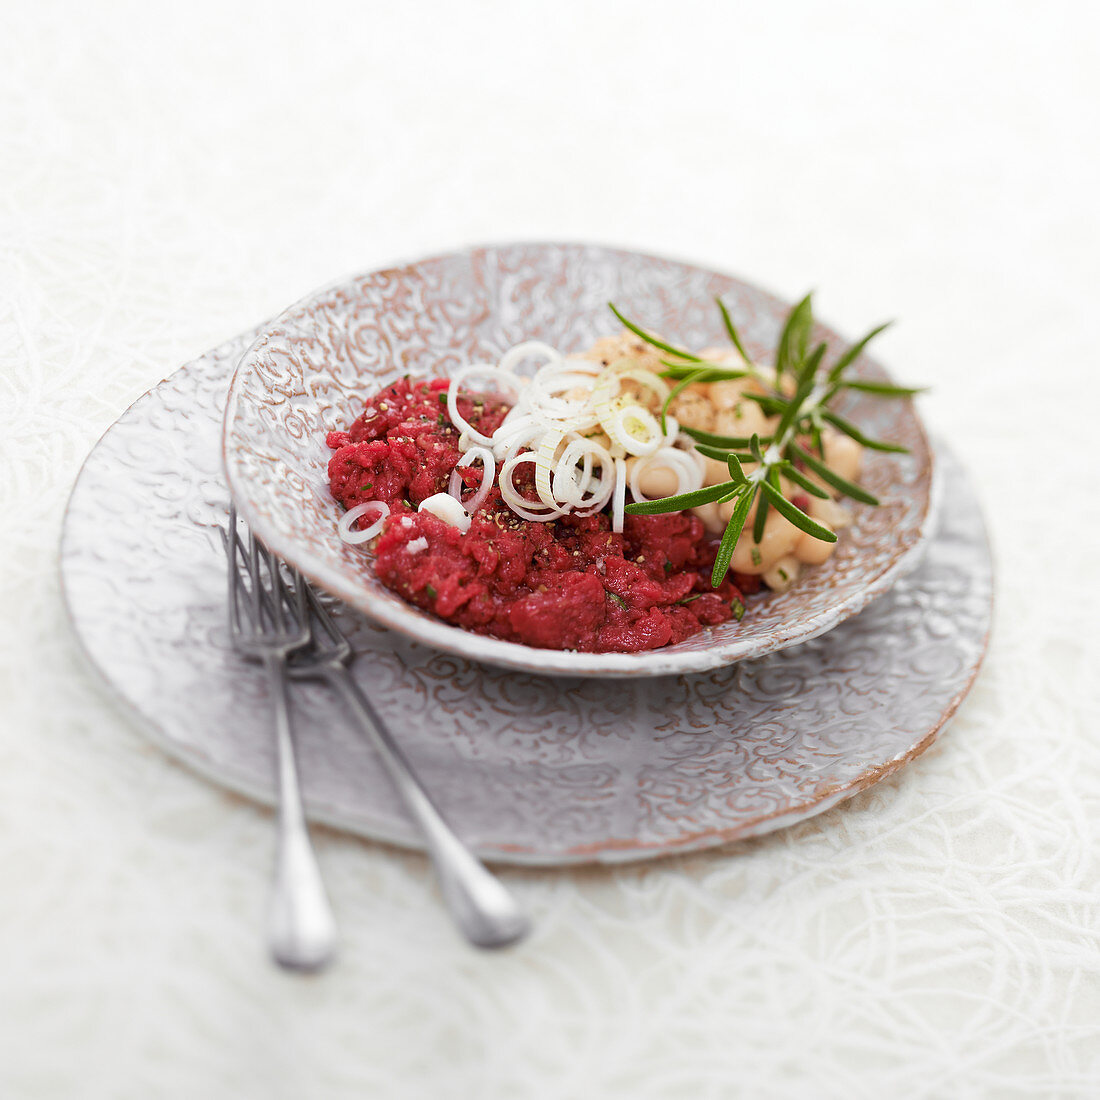 Horse meat tartare with white garden beans